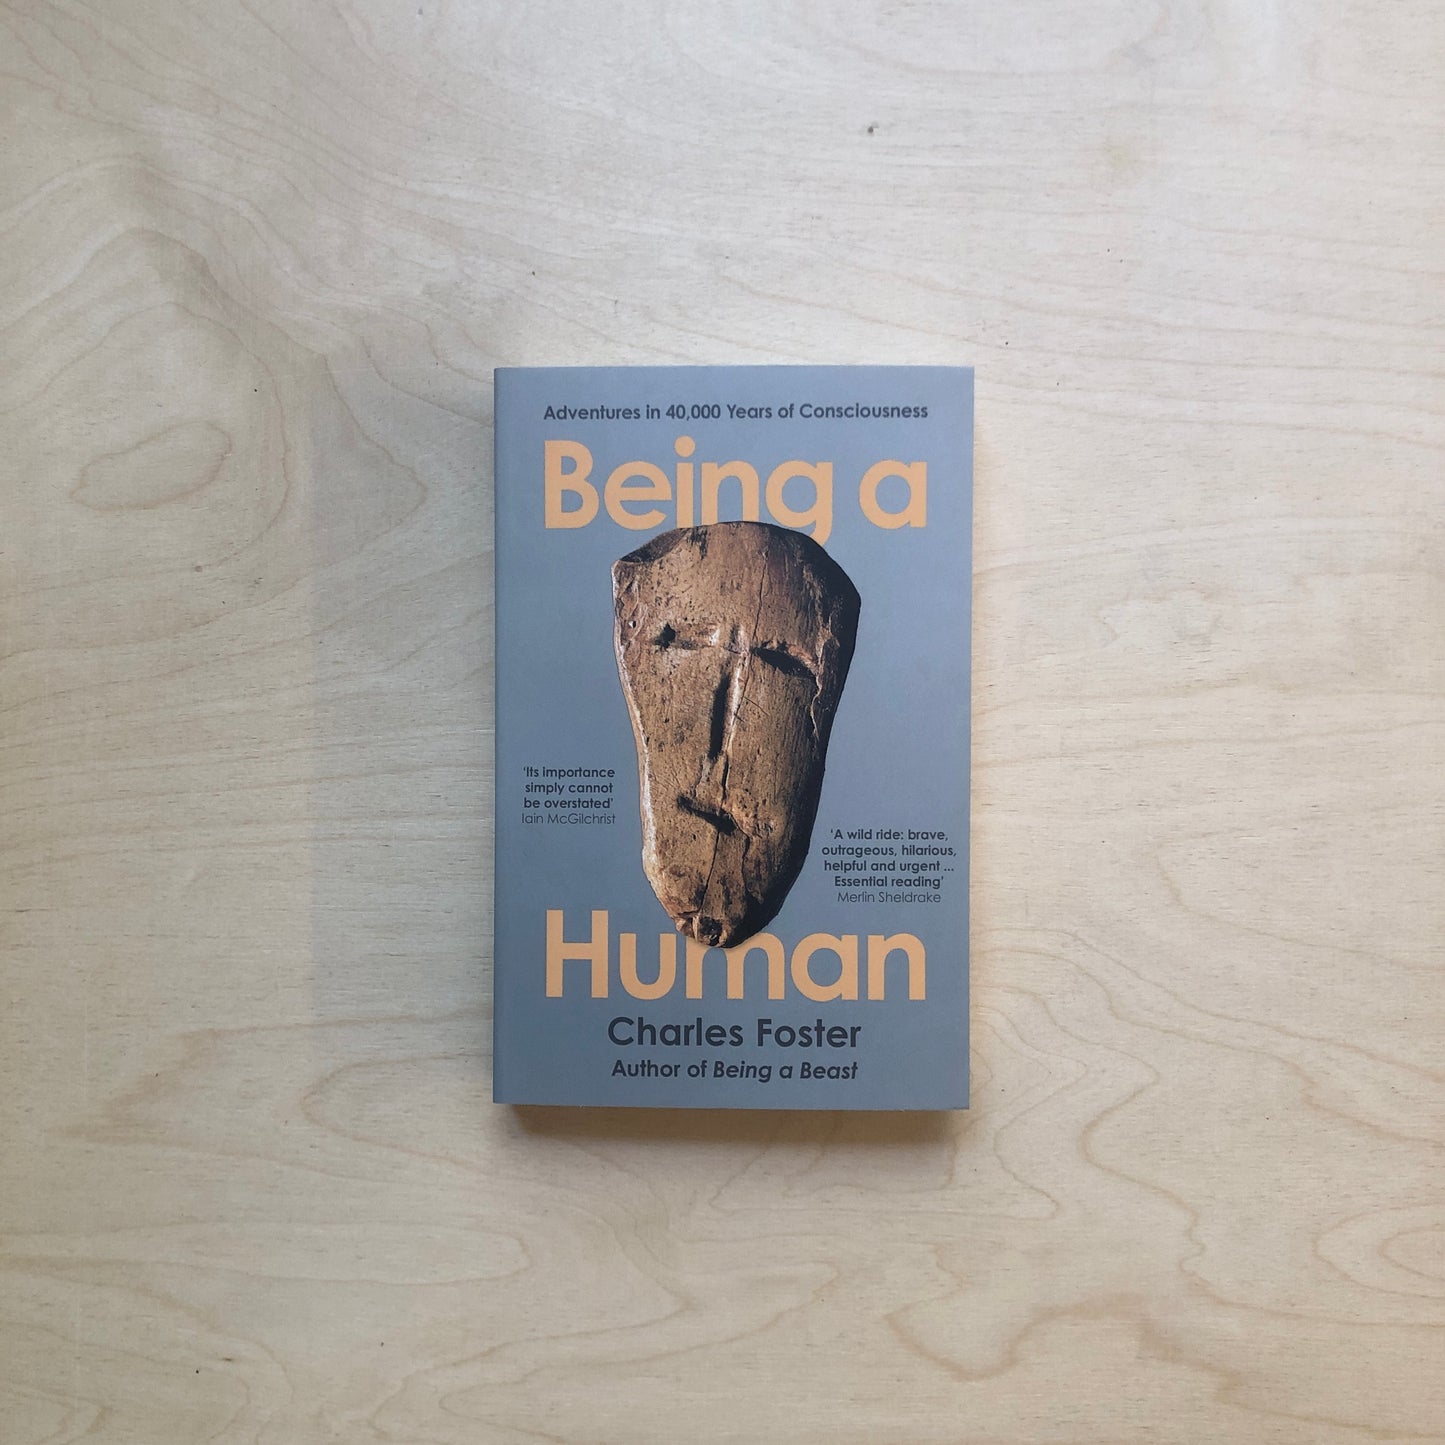 Being a Human - Adventures in 40,000 Years of Consciousness - Paperback